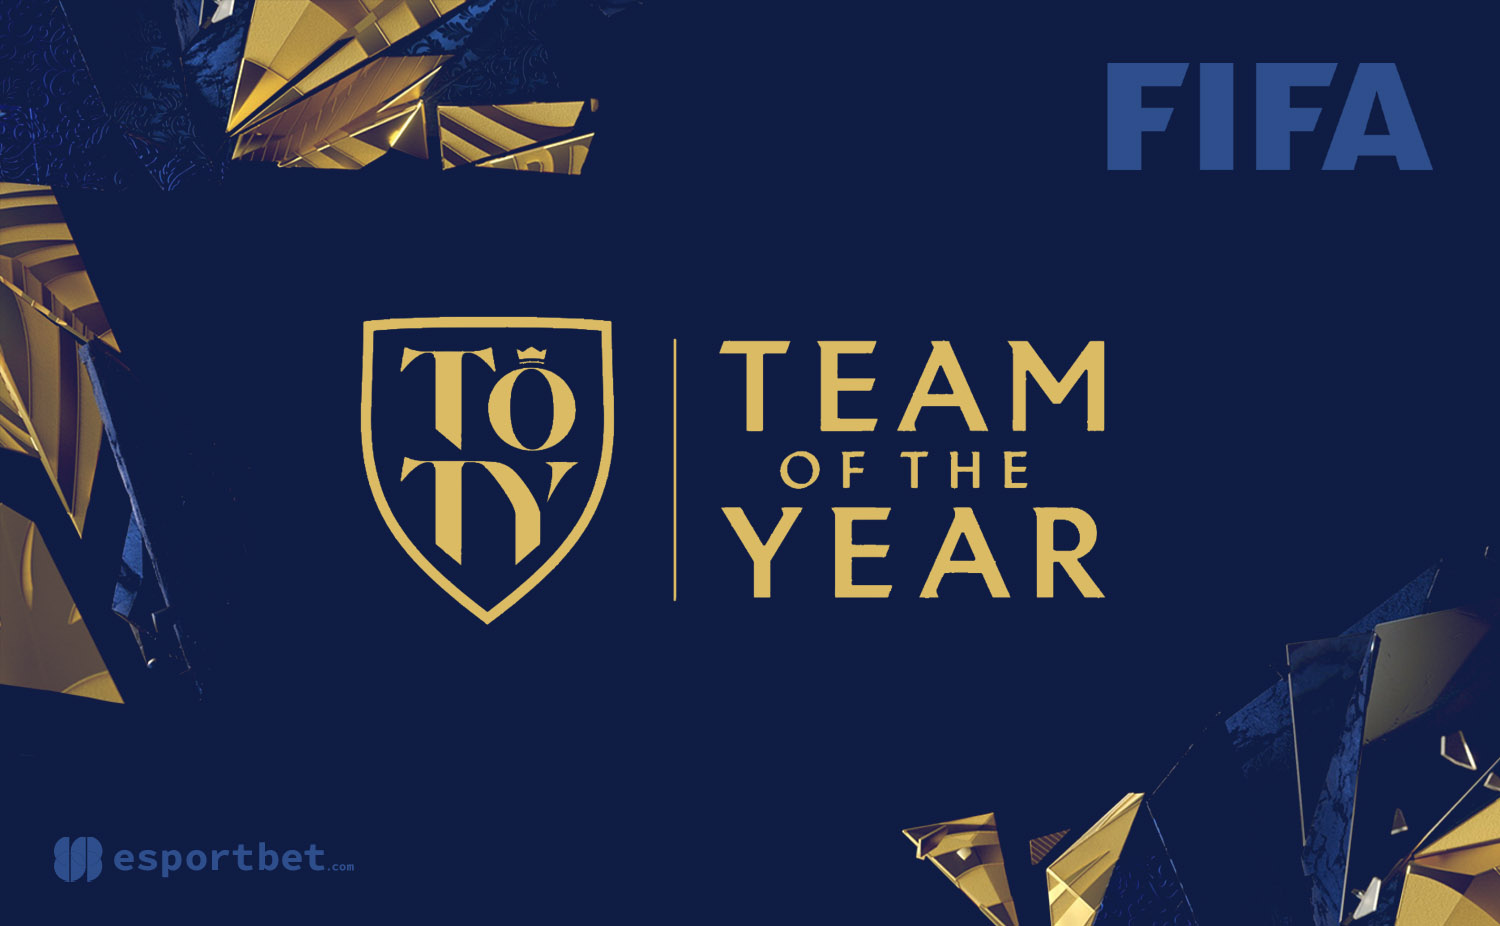 Fifa Team of the year